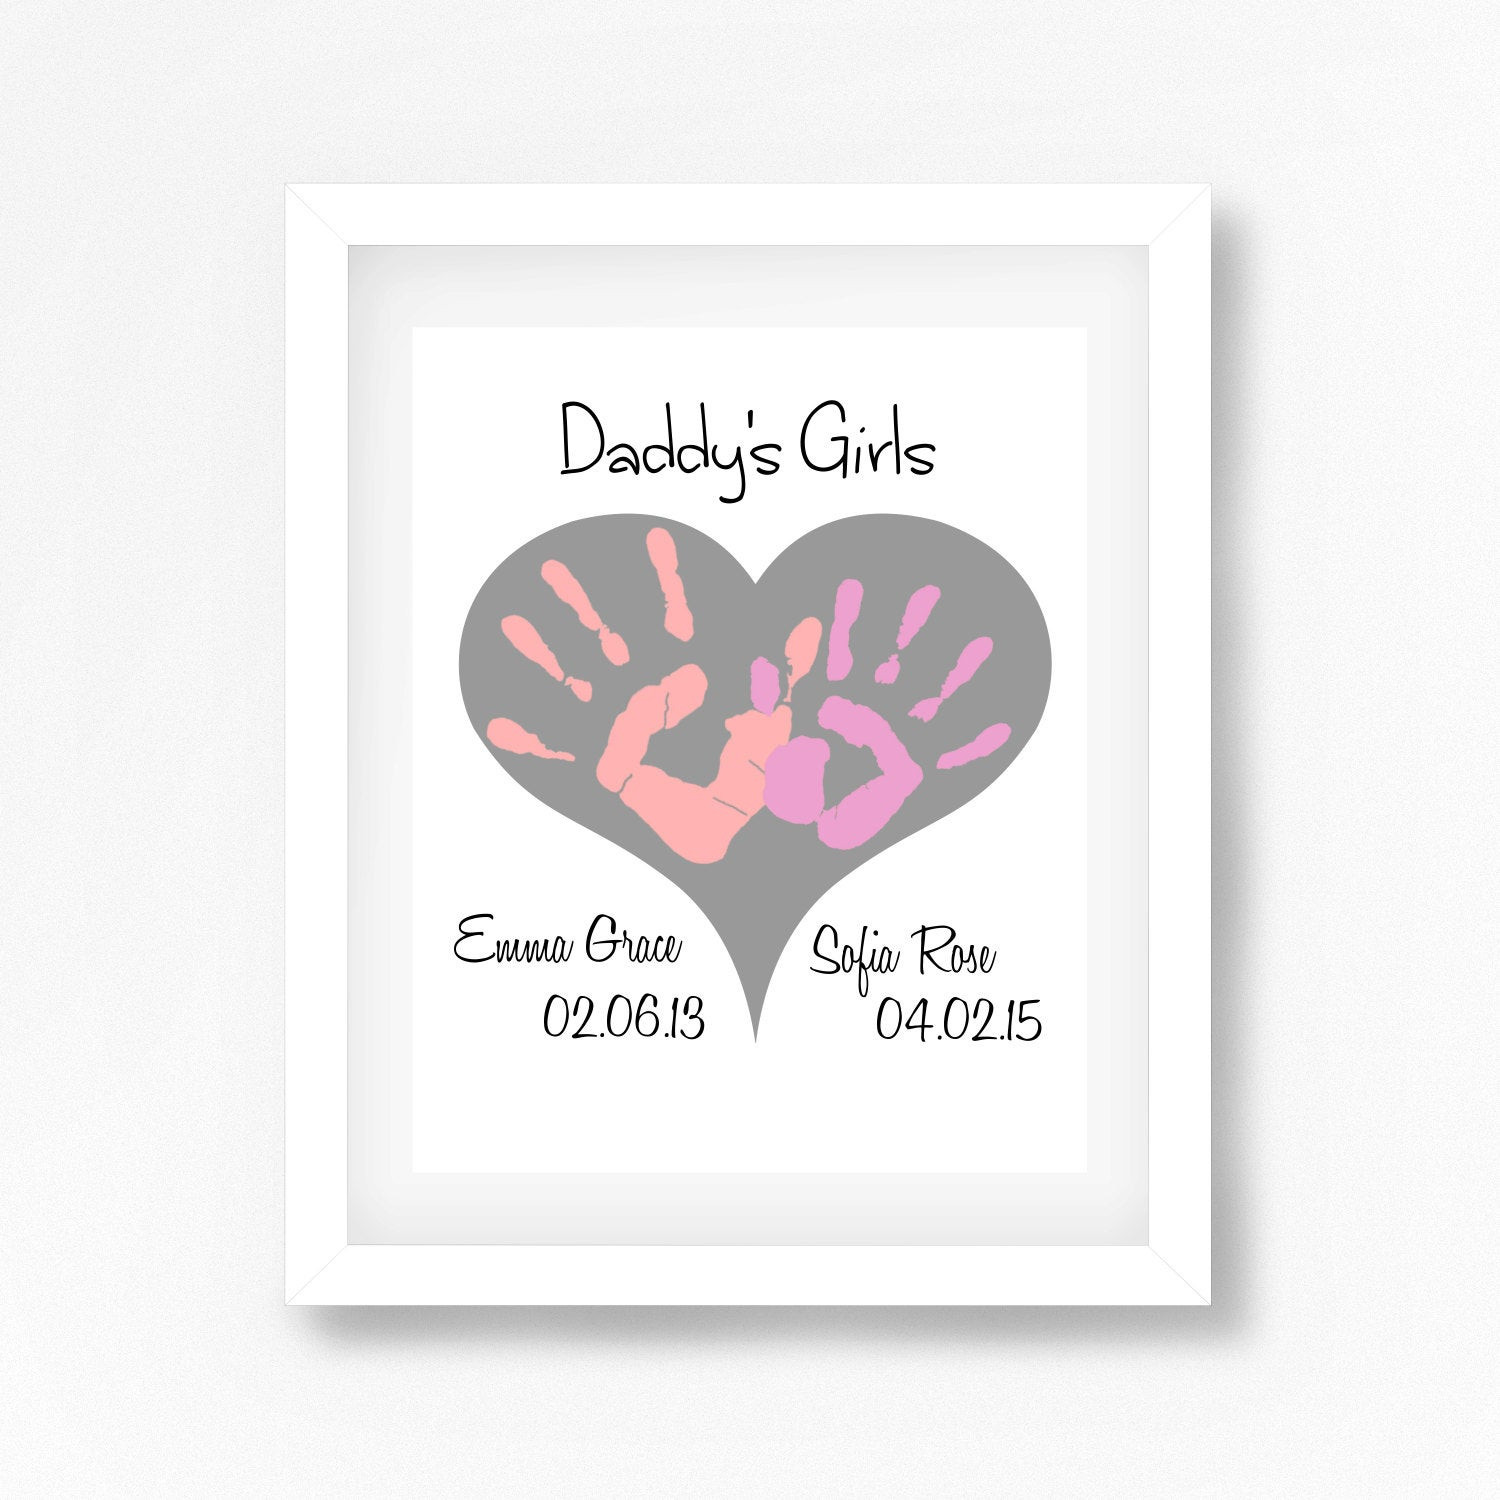 Daddy Daughter Fathers Day Gifts
 Daddy s Girls Gift Gift for Daddy from Daughters Fathers